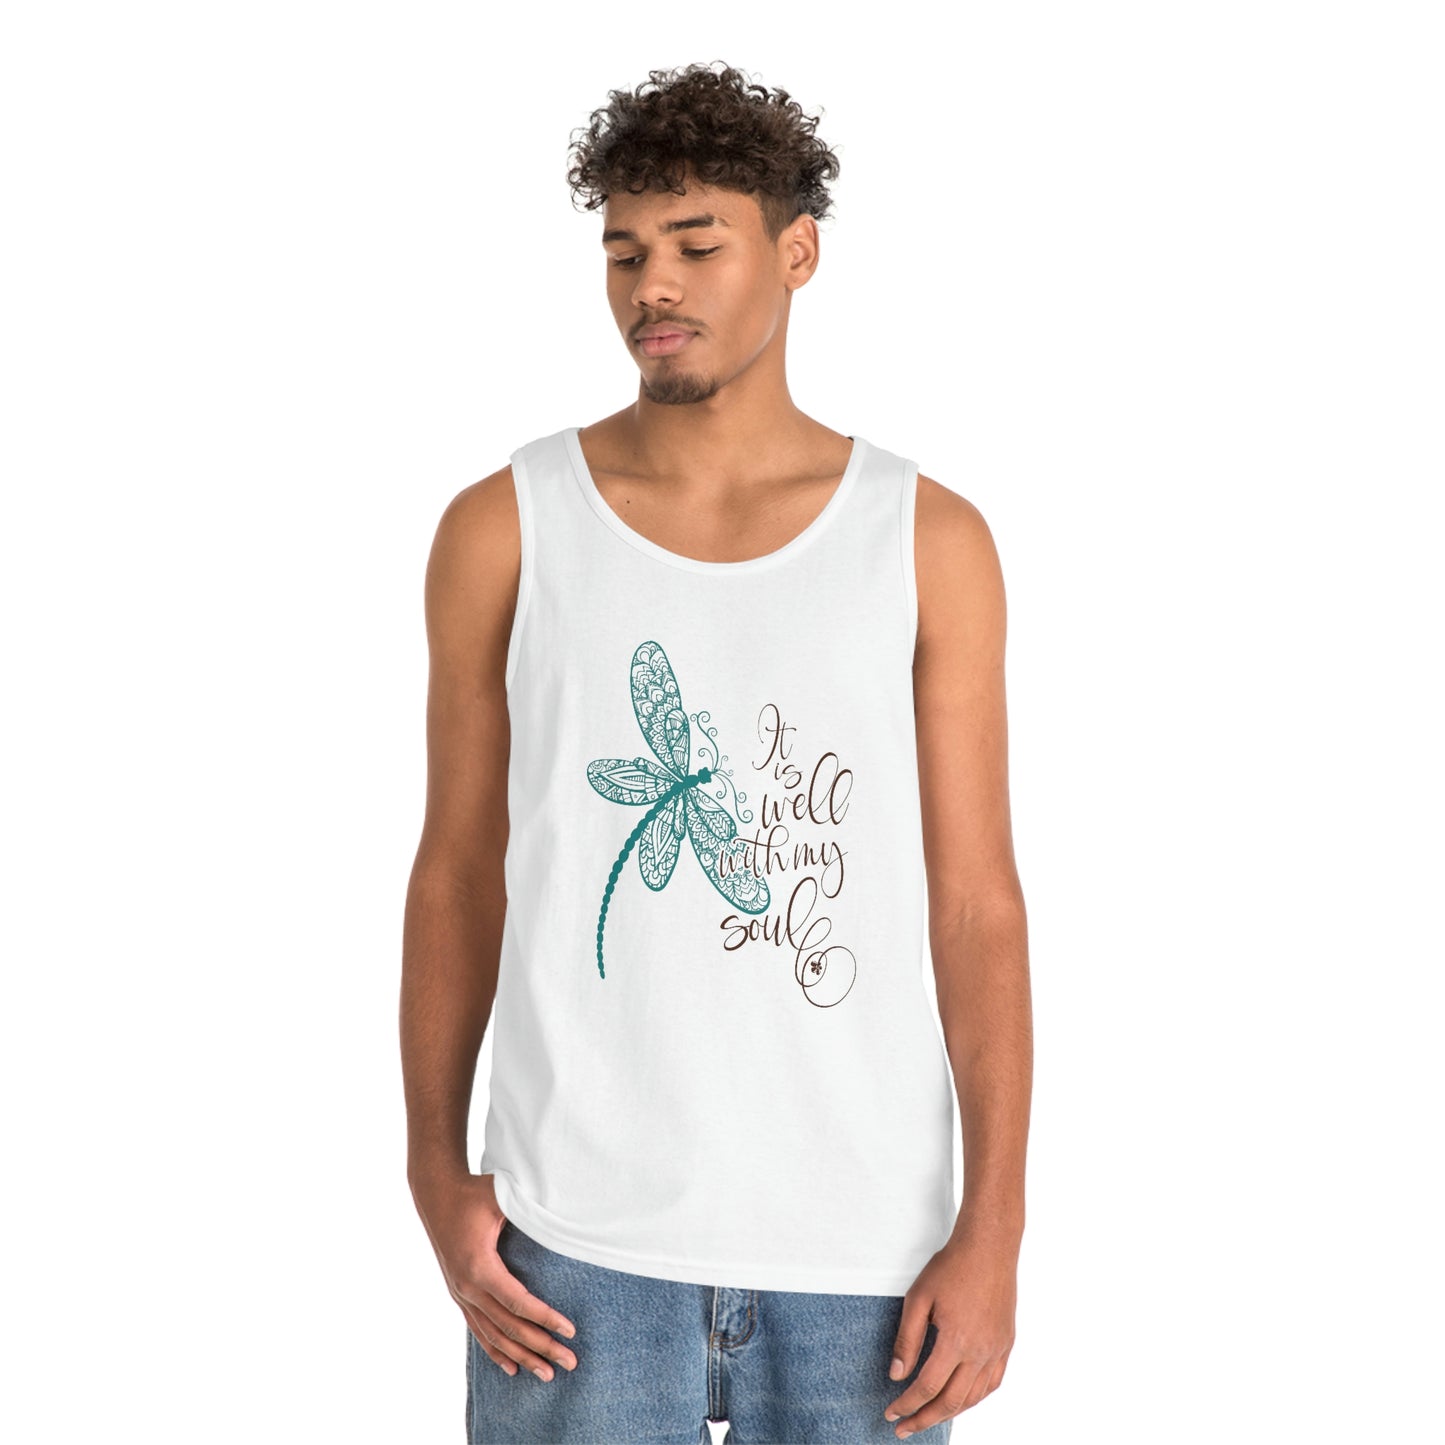 Blue Dragonfly Tank Top Summer Casual Wear Inspirational and Uplifting Sentiment for Women, Girls Lightweight, Perfect for Layering